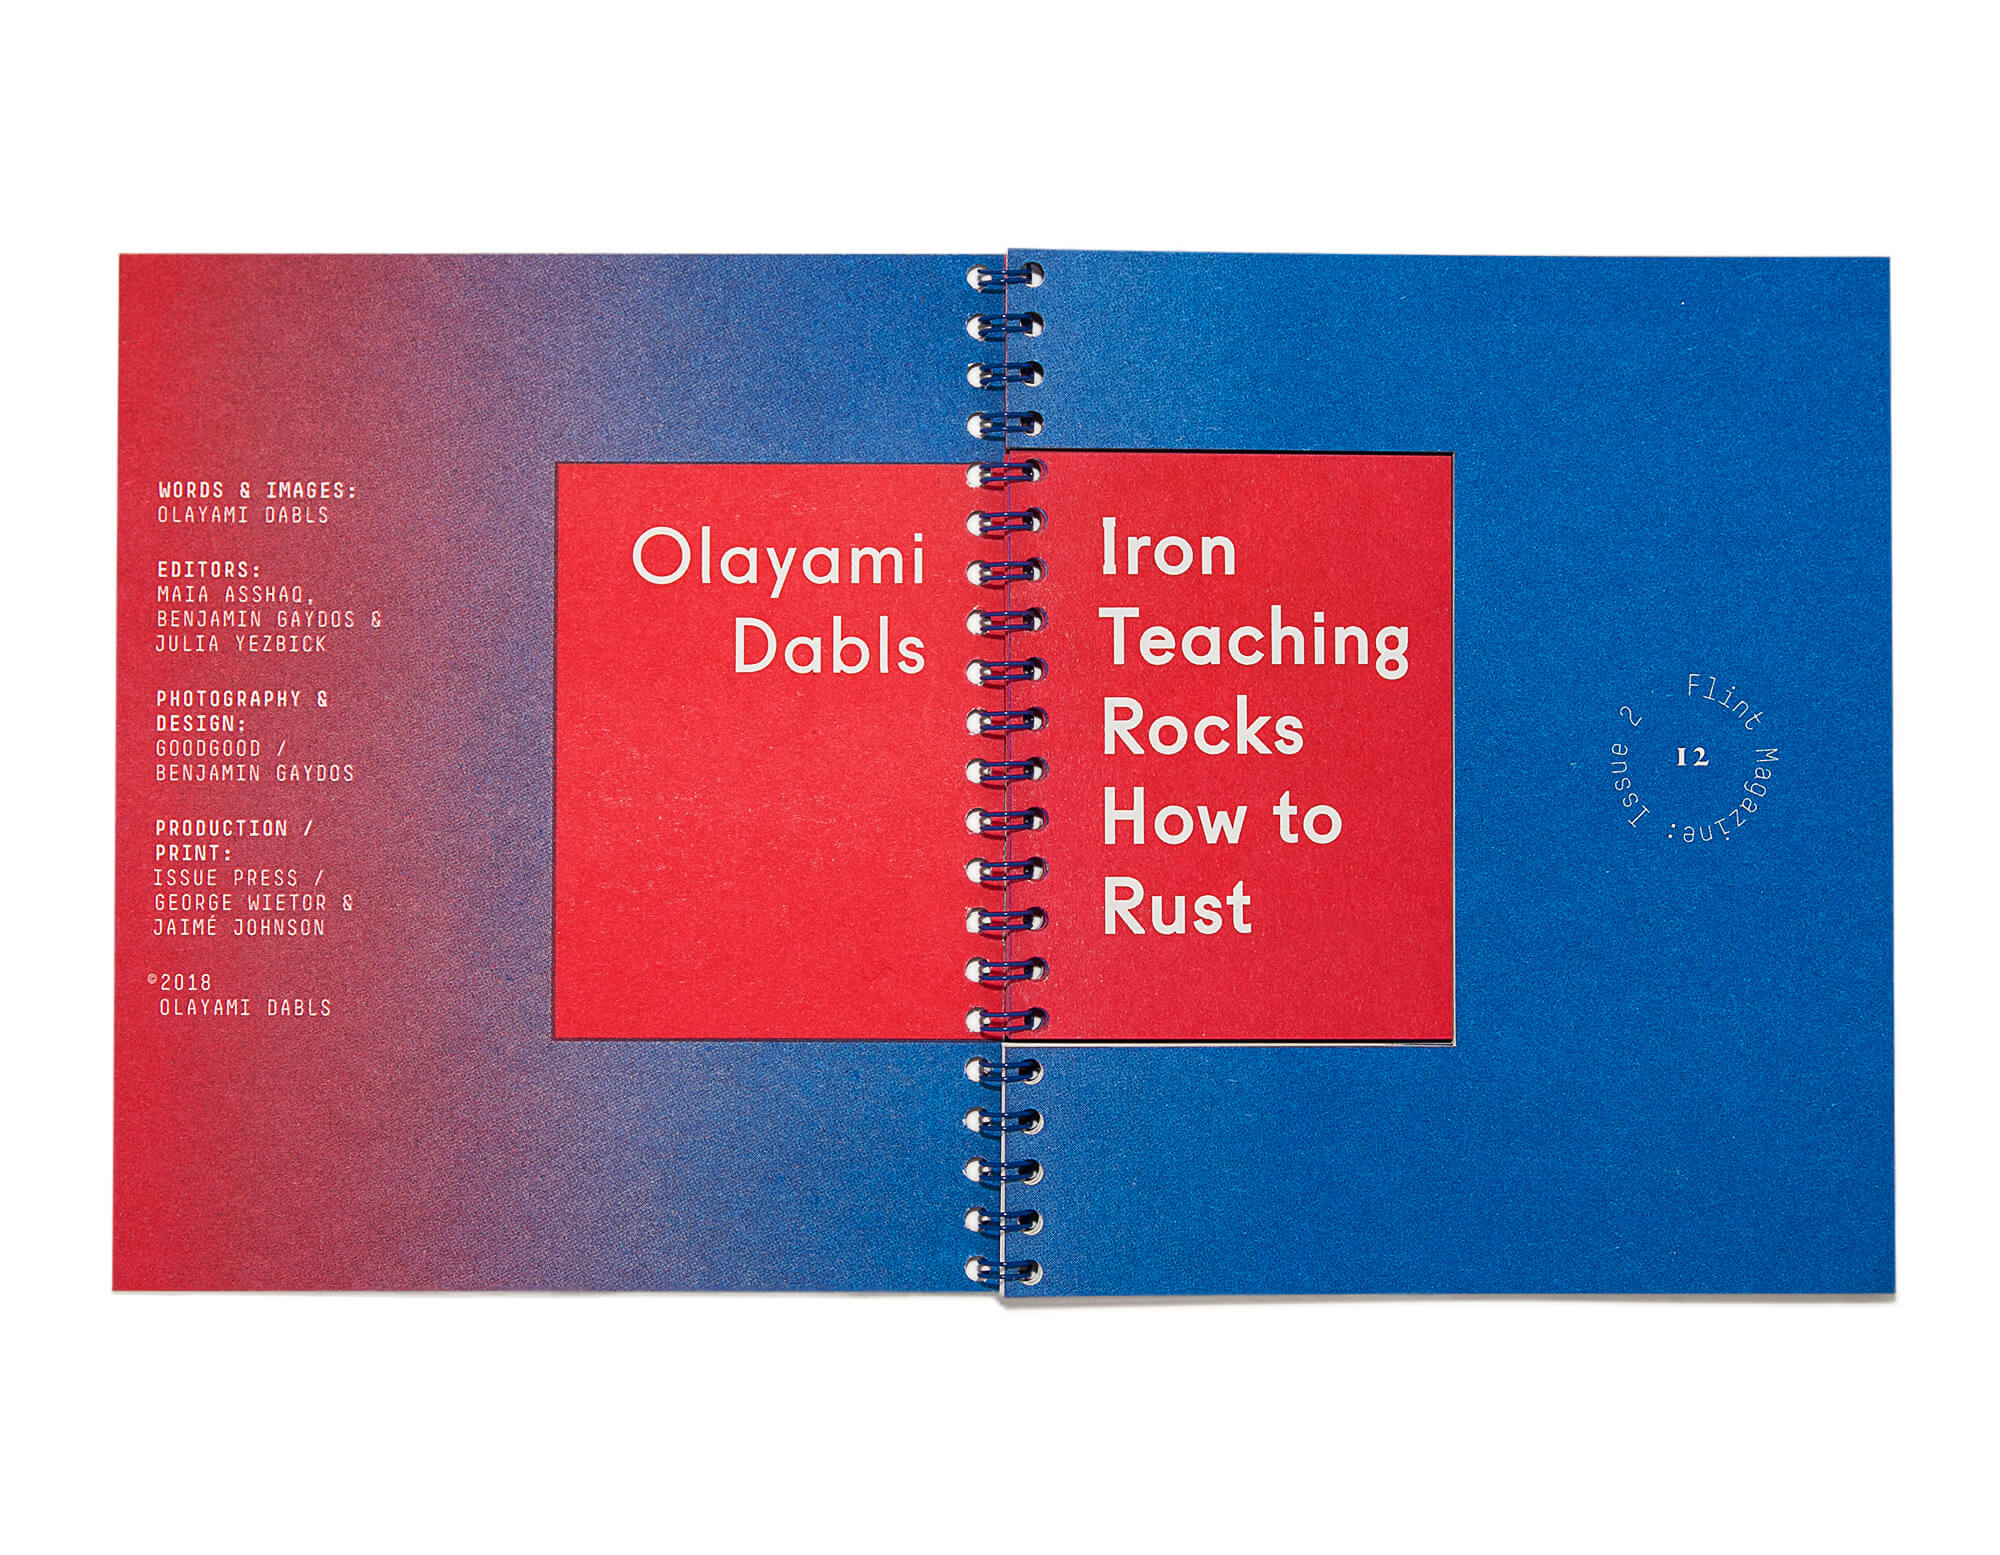 Excerpt of Iron Teaching Rocks How to Rust by Olayami Dabls